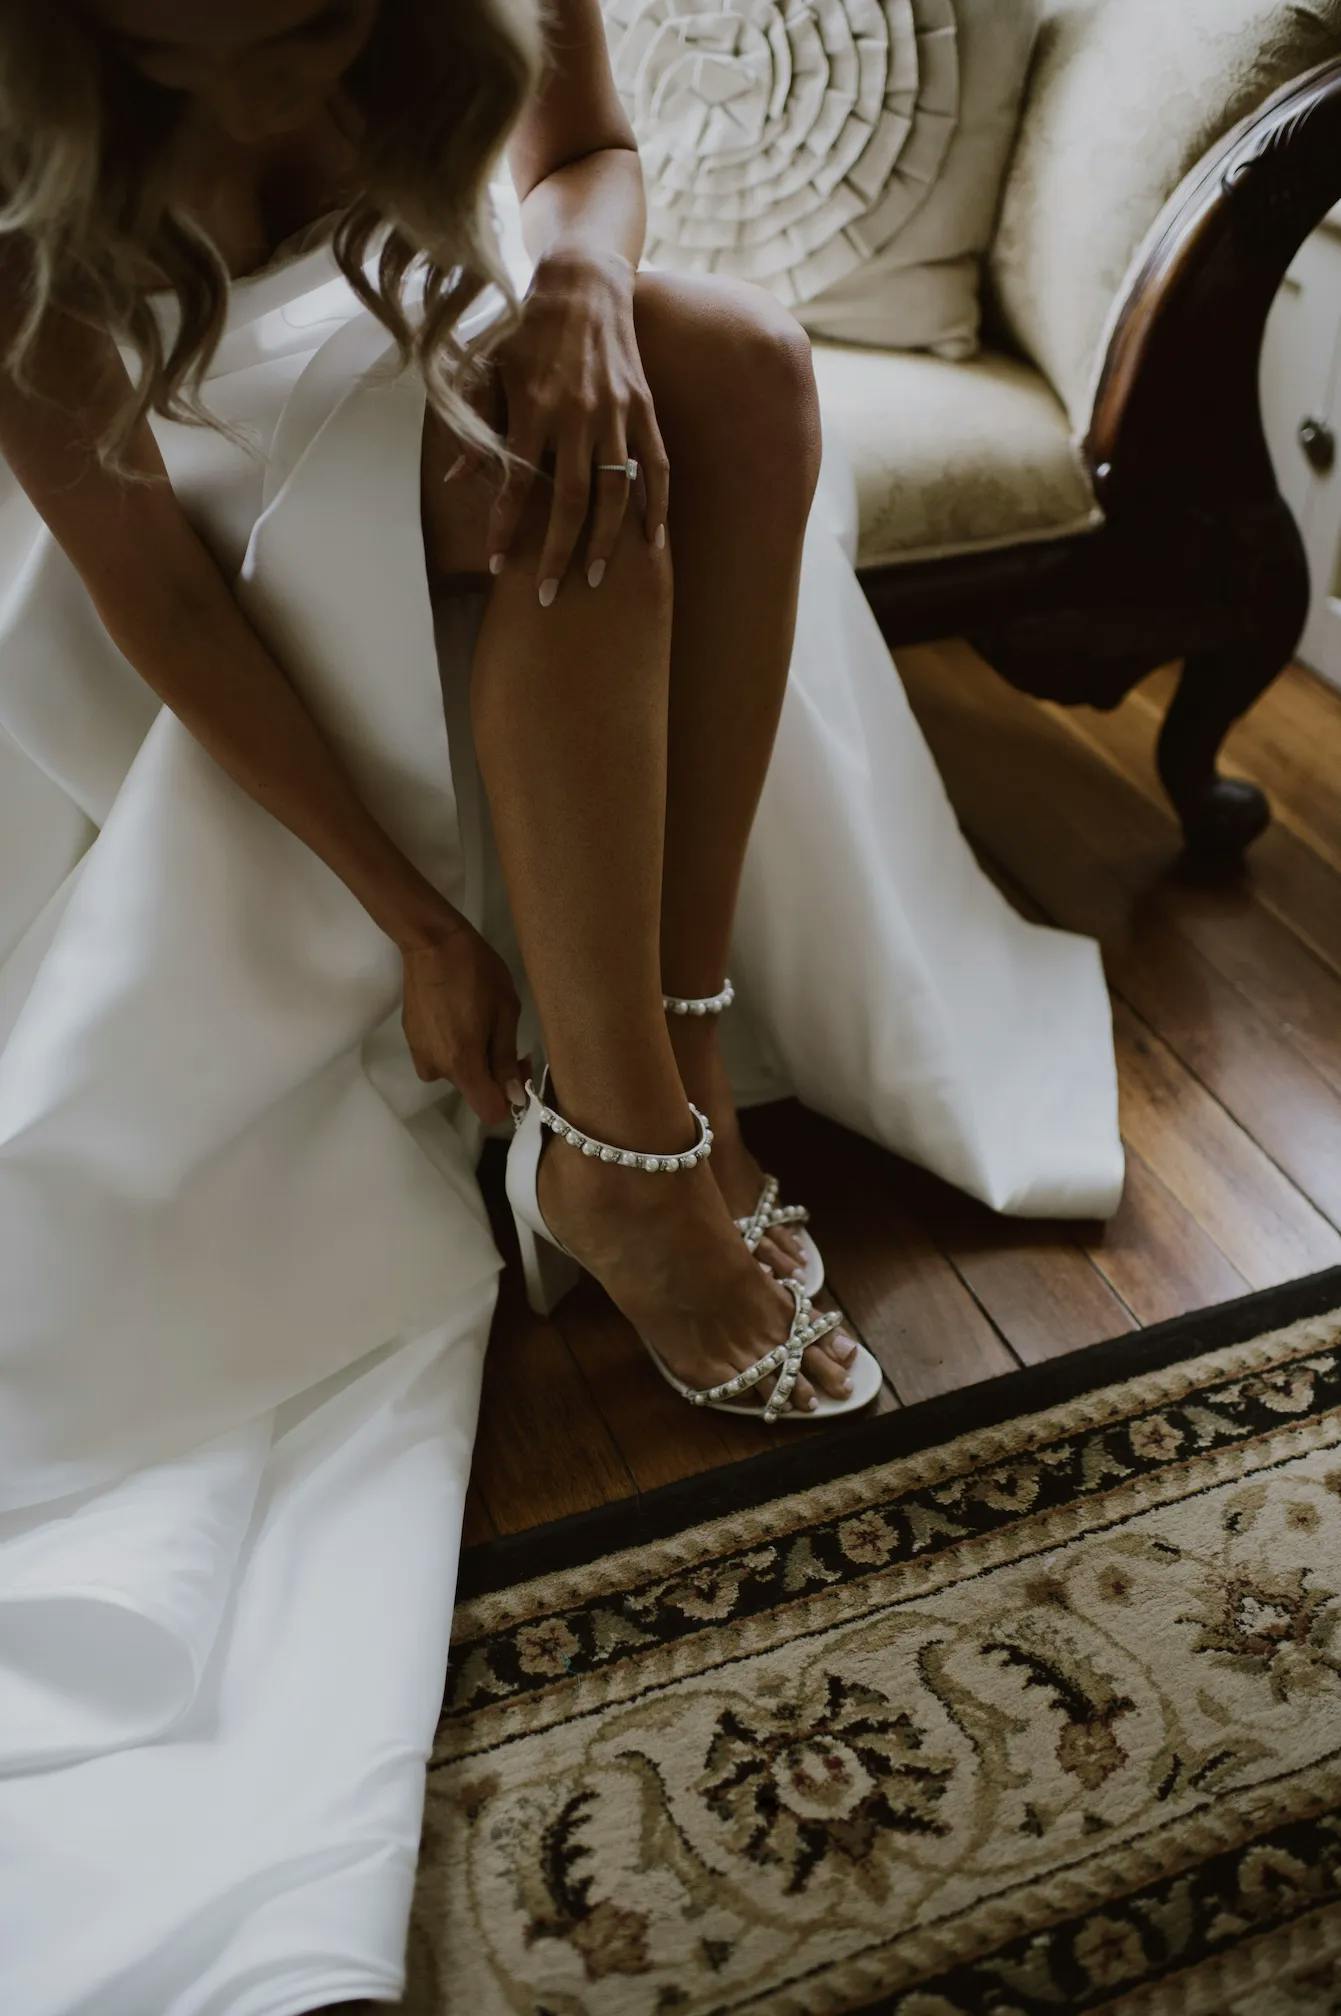 A woman in a white dress is sitting on an upholstered chair and adjusting the strap of one of her pearl-embellished high-heeled sandals. The scene includes a patterned rug and wooden flooring.